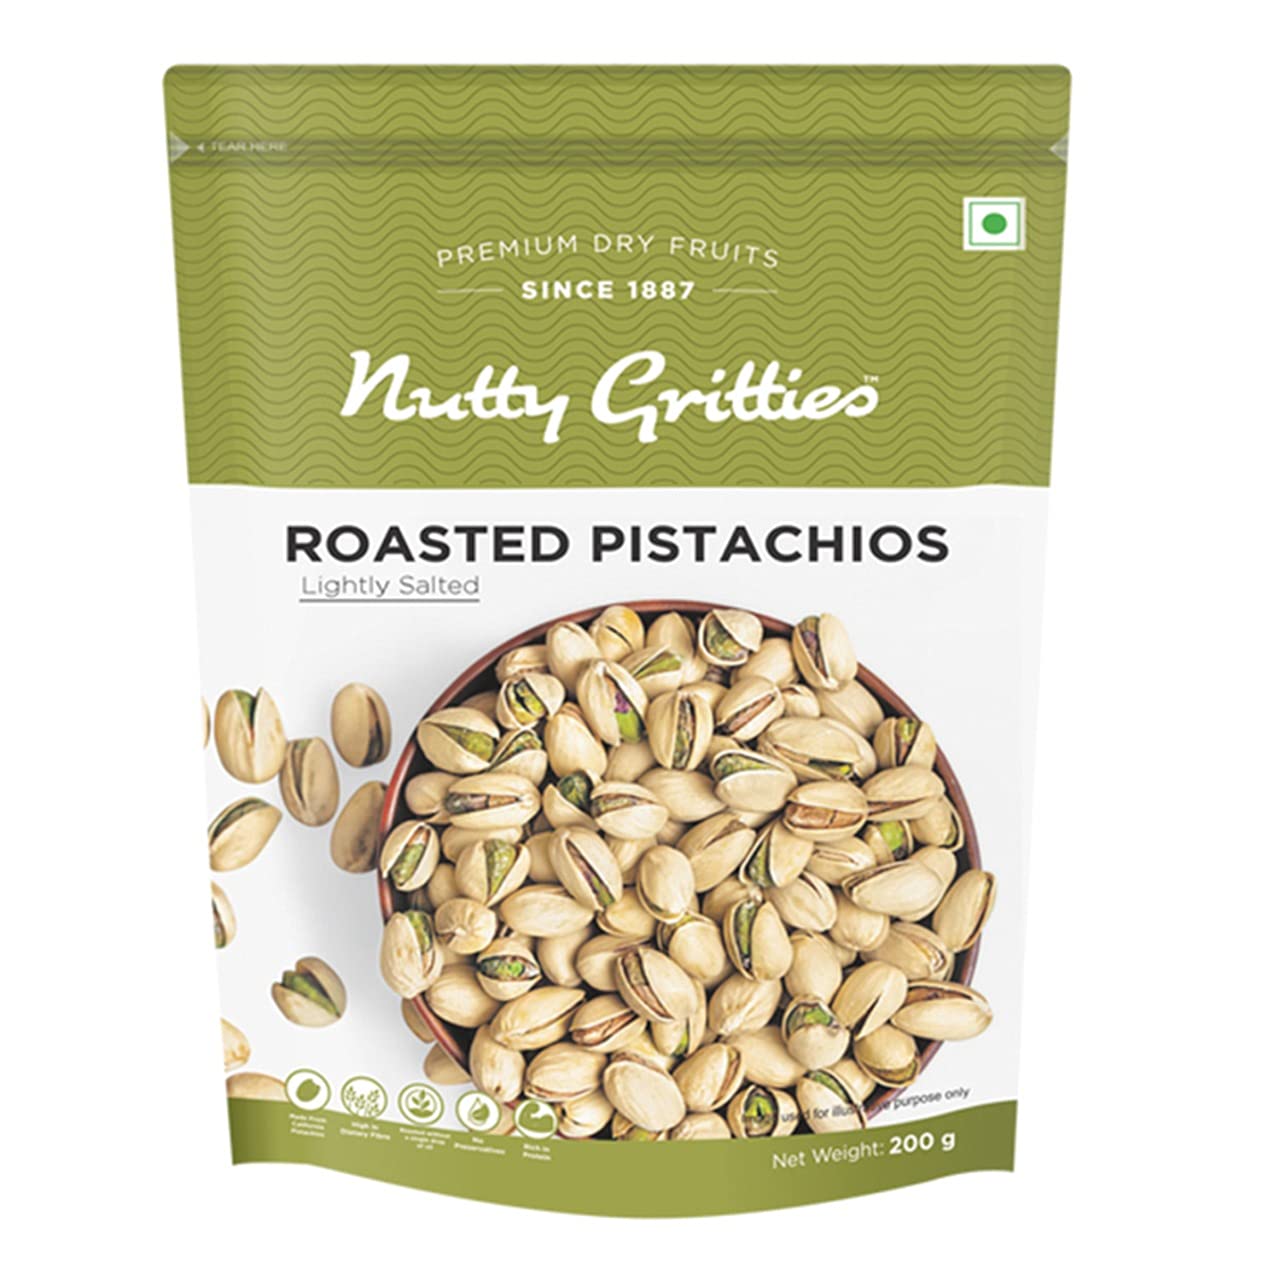 Nutty Gritties Roasted Pistachios Image